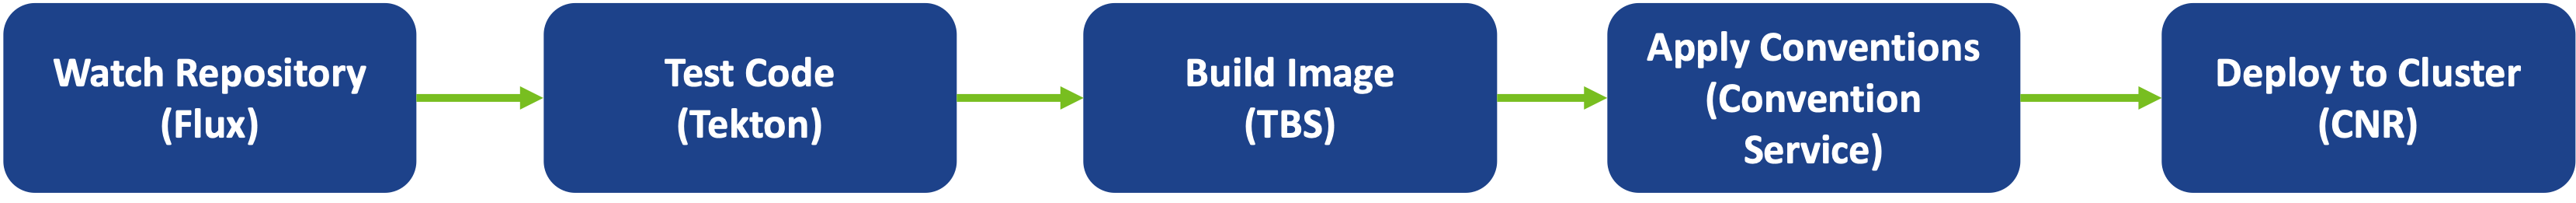 The Source-and-Test-to-URL chain: Watch Repo (Flux) to Test Code (Tekton) to Build Image (TBS) to Apply Conventions to Deploy to Cluster (CNRs).